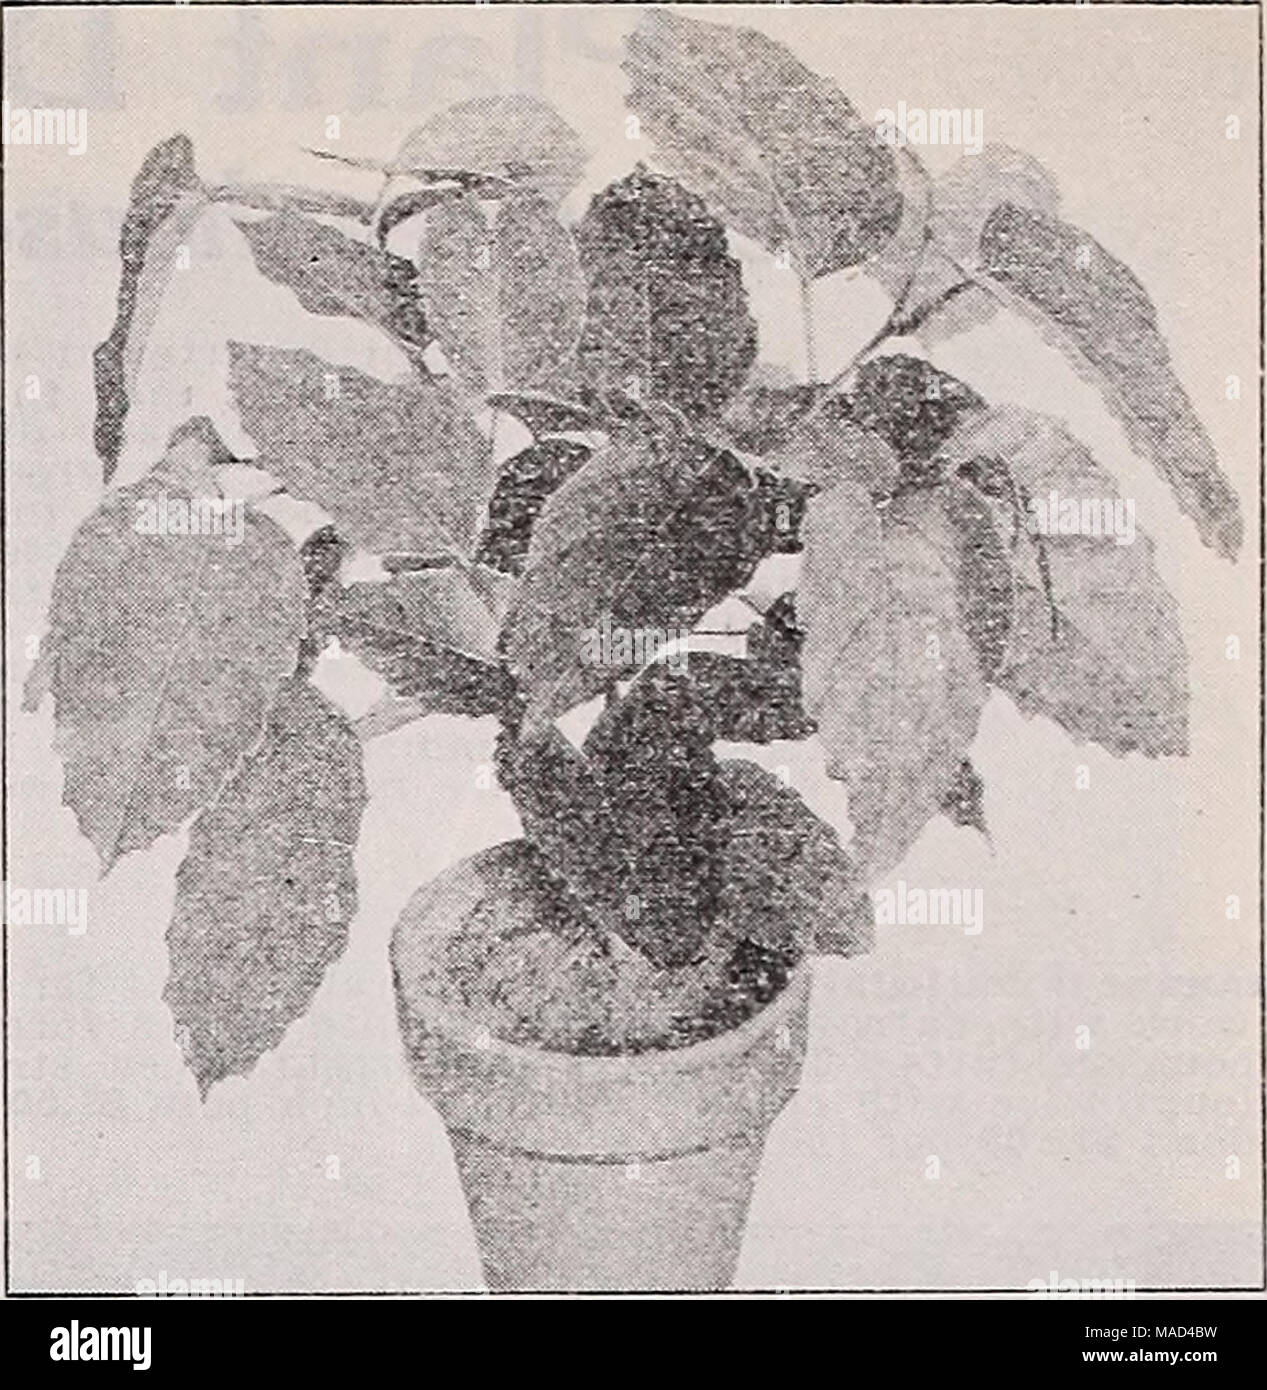 . Dreer's wholesale catalog for florists and market gardeners : 1940 winter spring summer . Clssus antarctica Cissus antarctica—Kangaroo Vine A house plant resembling in habit the well-known and popular Grape Ivy, Vitis rhombifolia. The deeply toothed, rather thick, glossy dark green leaves about 4 inches long are ovate or oblong and sometimes heart- shaped. They resemble those of the Chestnut Tree. The plant branches freely forming a compact attractive bush. As it grows larger it vines much like the Grape Ivy. having tendrils for climbing. We have tested it thoroughly for several years and ca Stock Photo